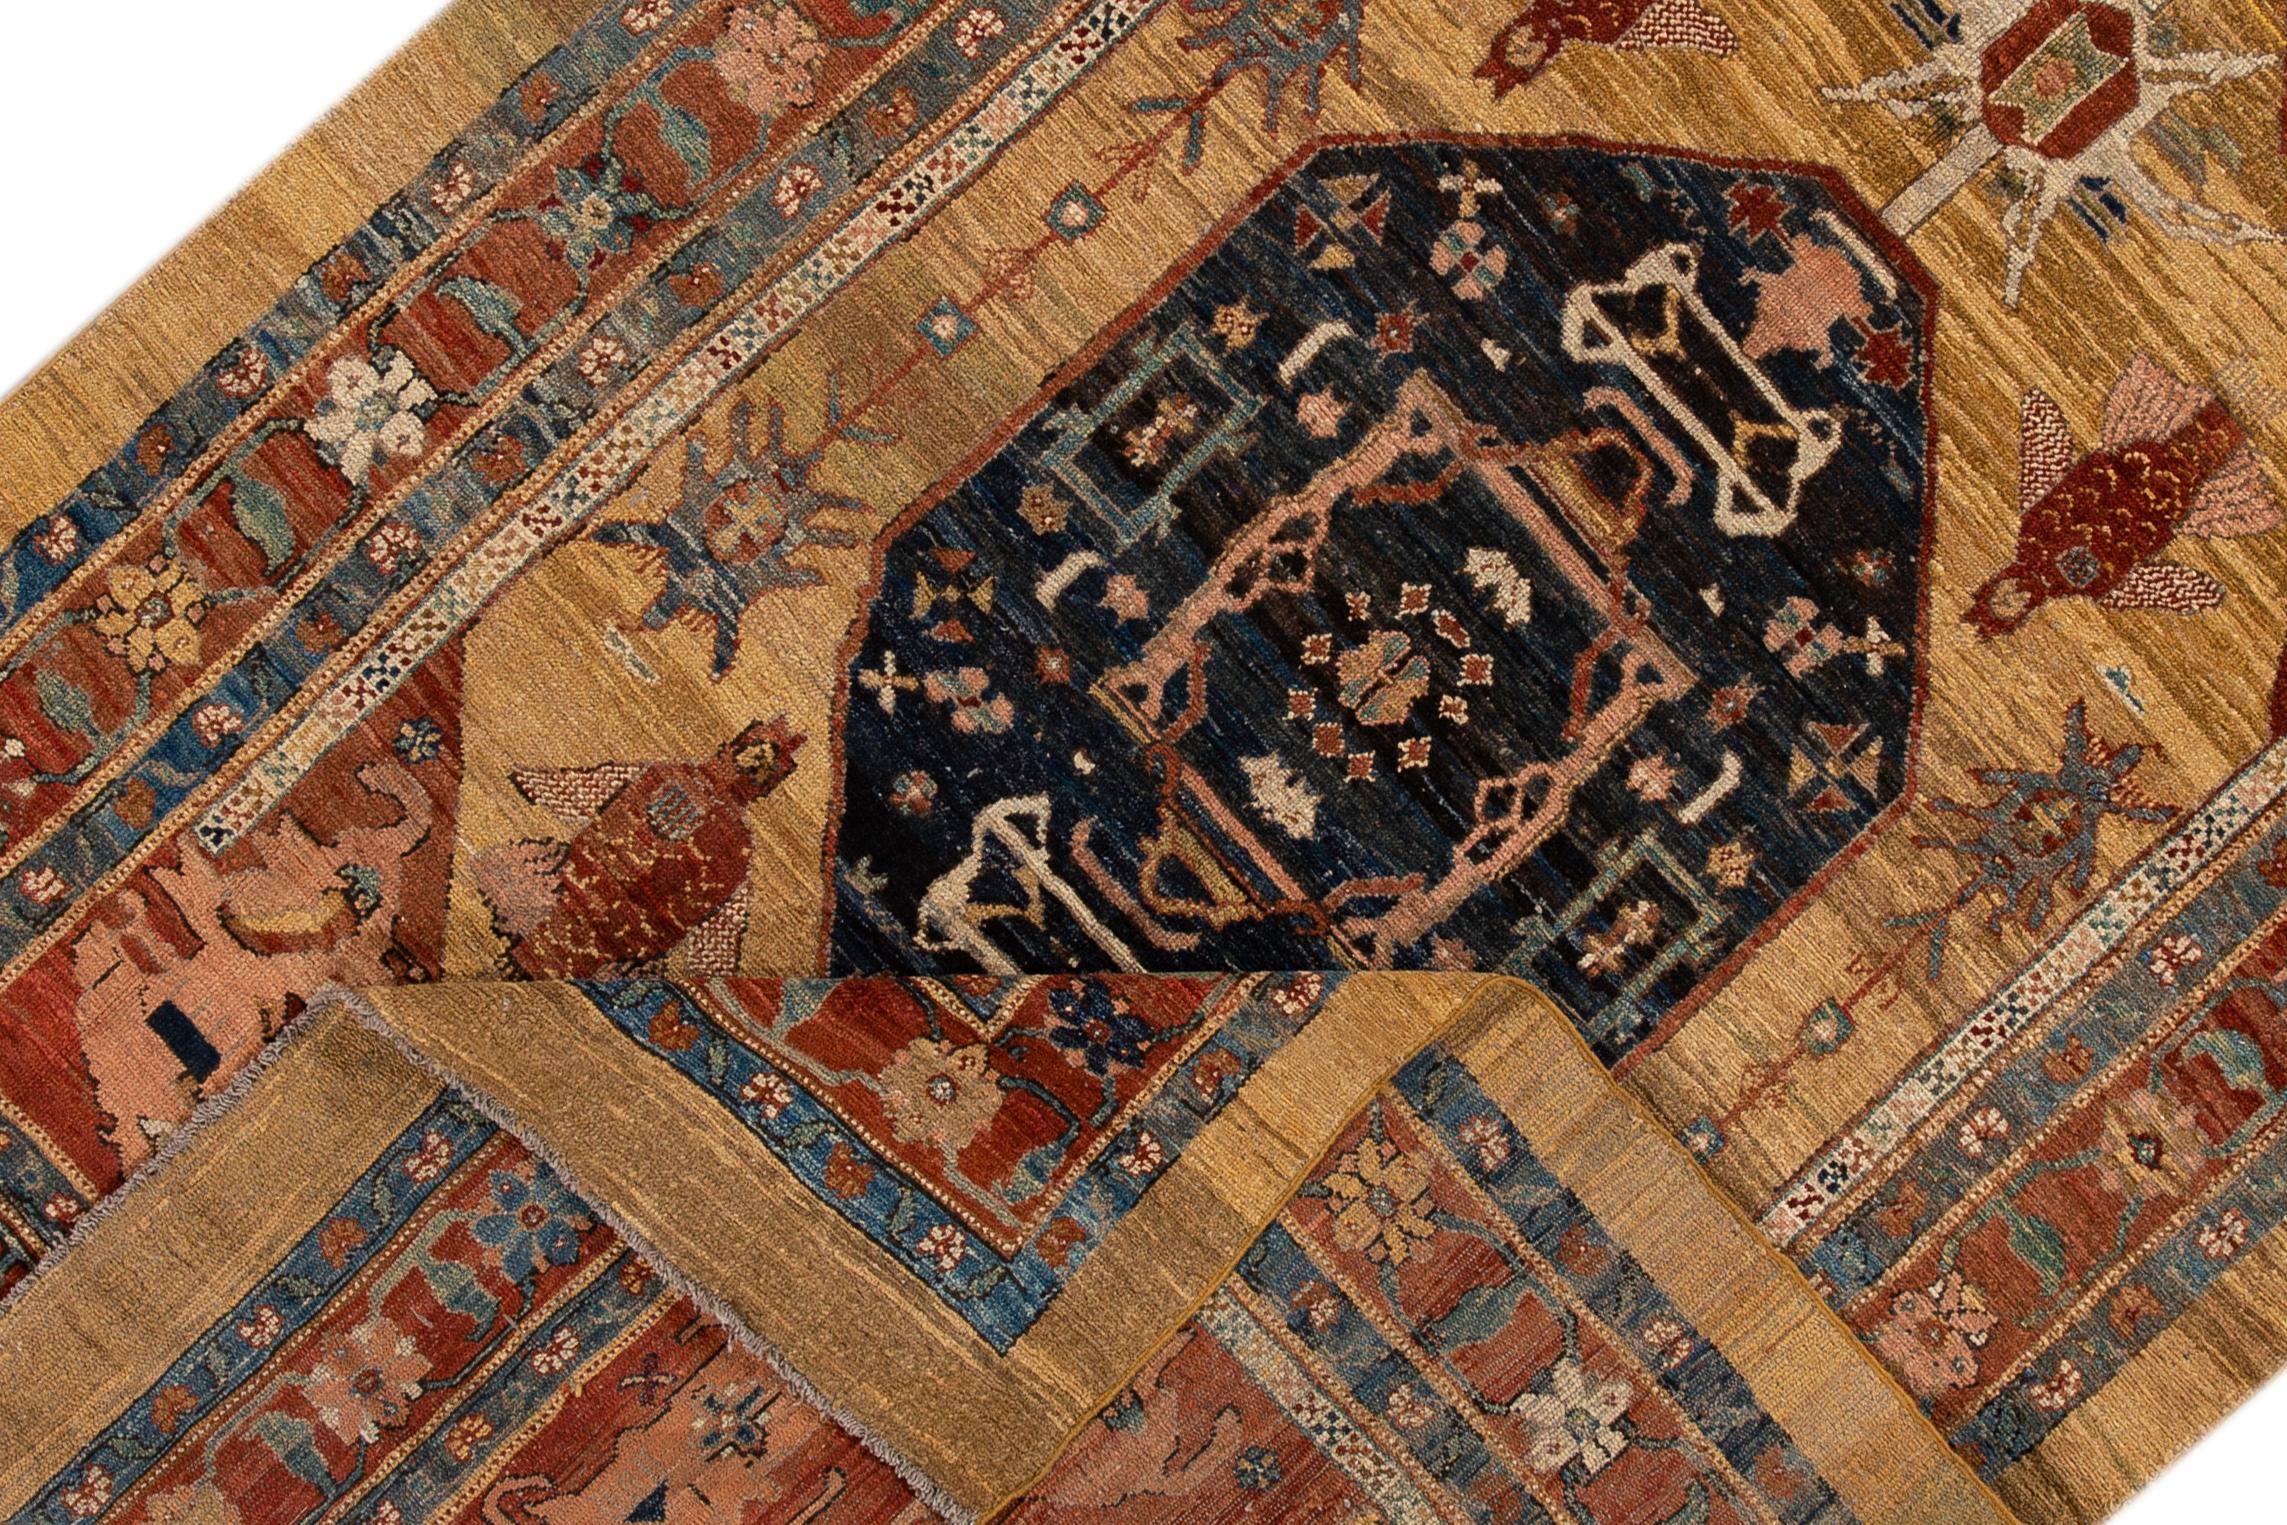 Beautiful vintage Bakshaish wool rug with a tan field, the fame of rust. This rug has multi-color accents in an all-over geometric design.

This rug measures 7' x 11'.